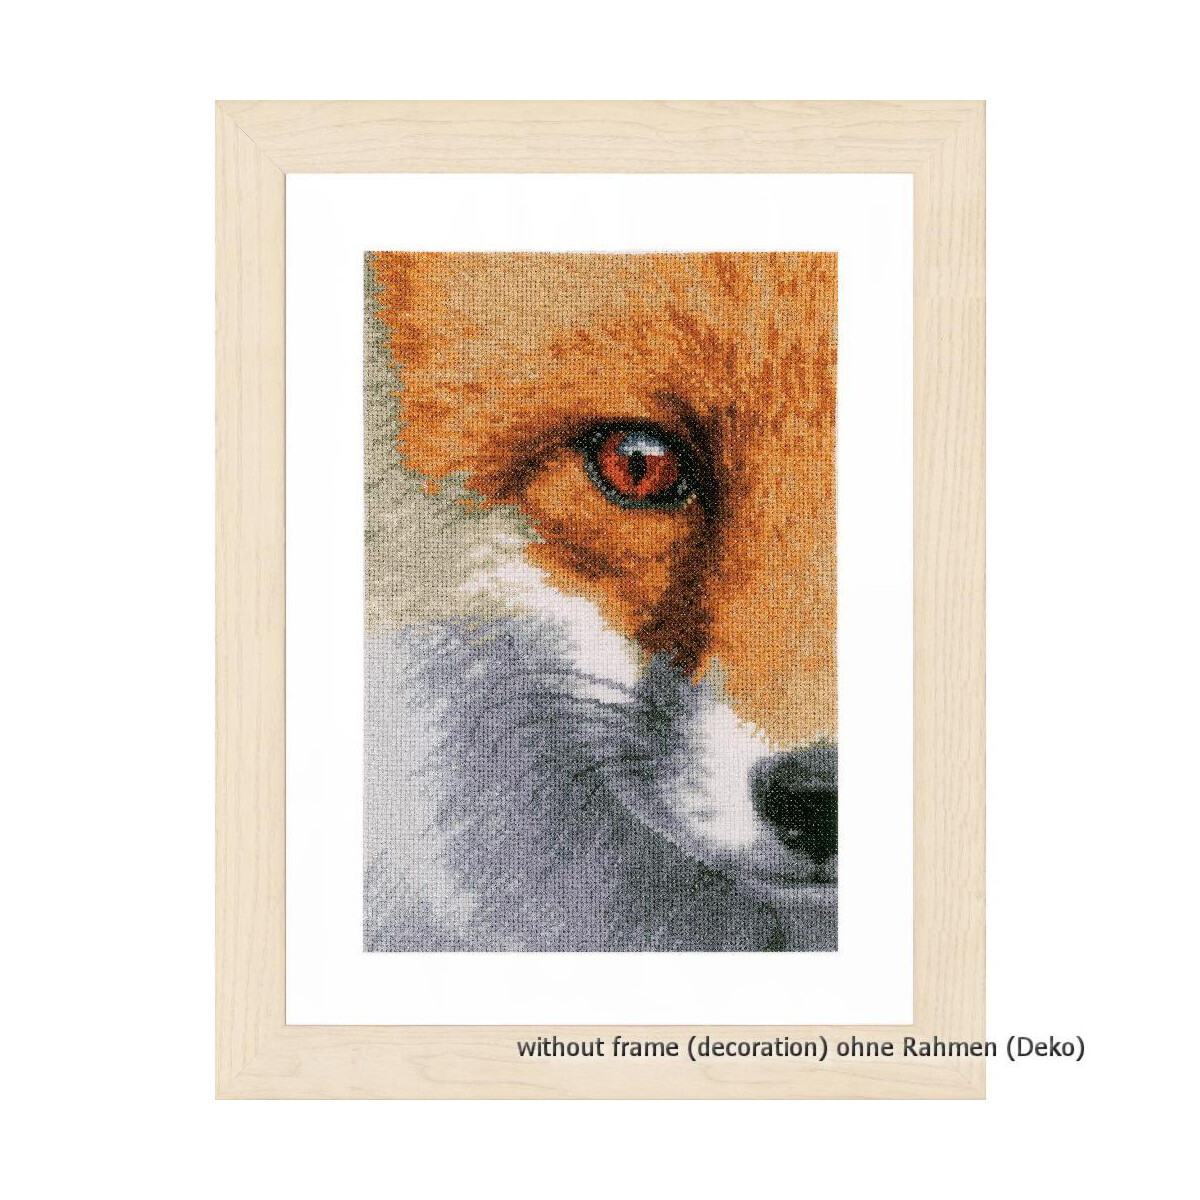 A work of art of a fox focusing on its eye and facial...